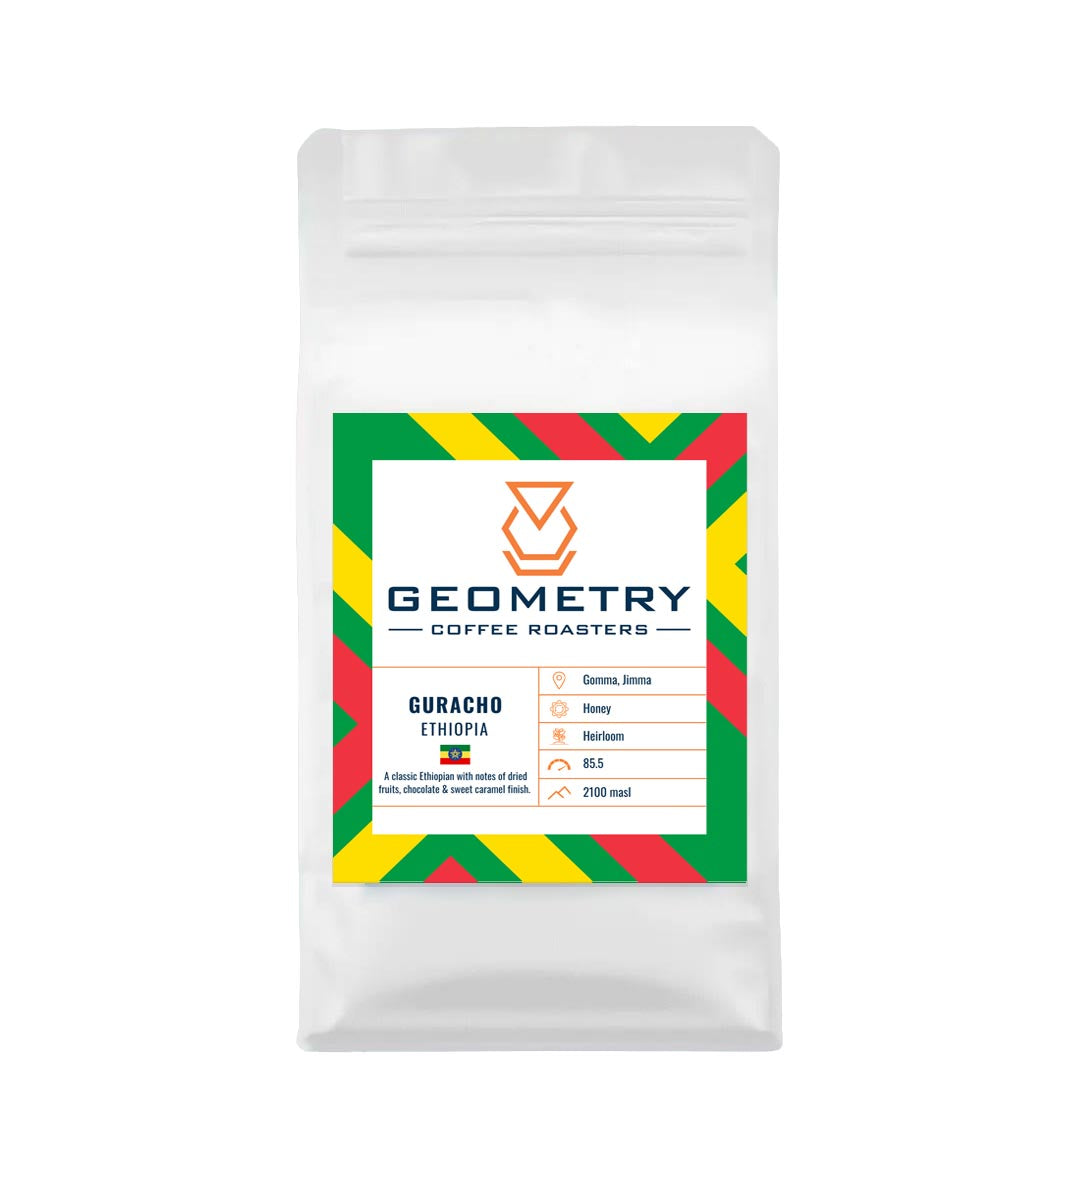 Guracho is a specialty coffee from Ethiopia by Geometry Coffee Roasters Galway